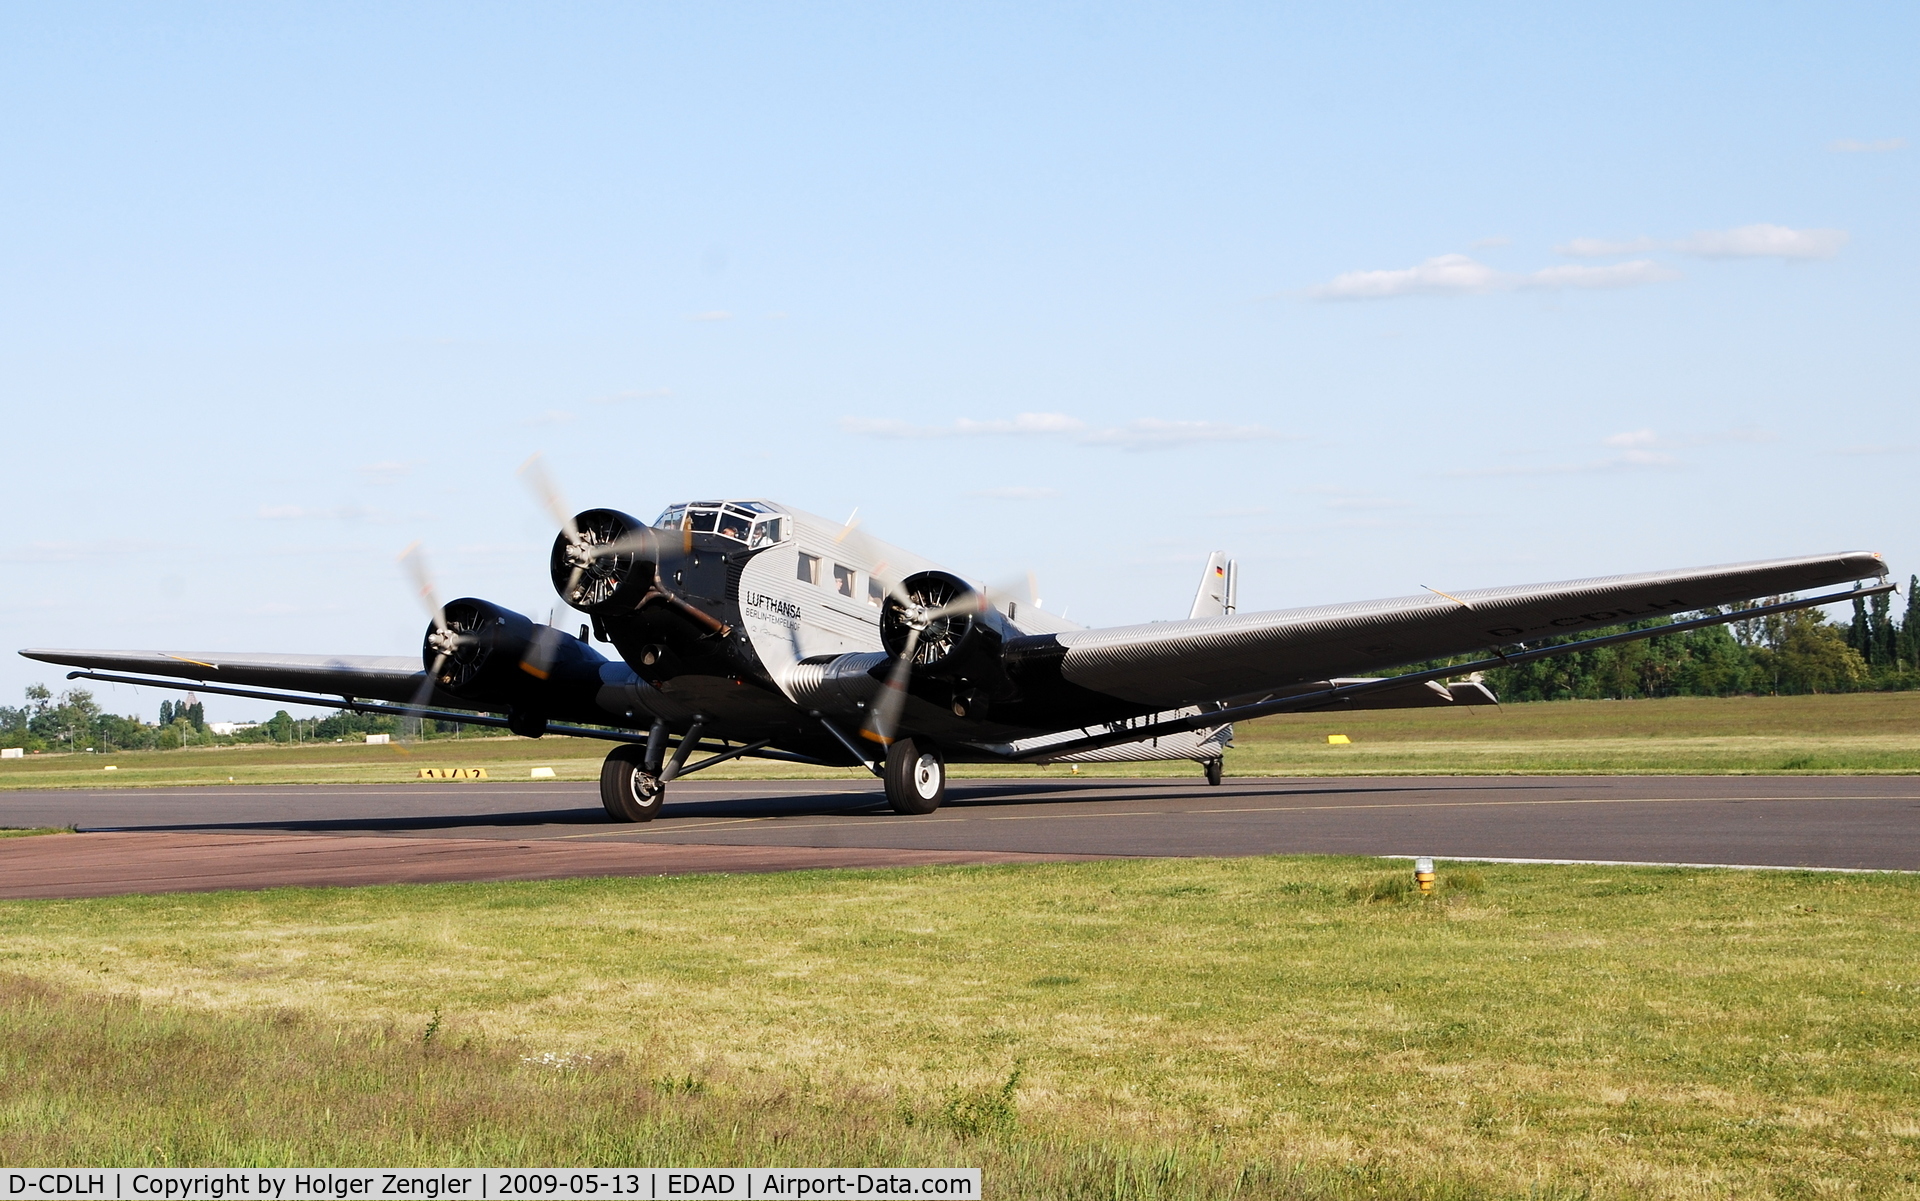 D-CDLH, 1936 Junkers Ju-52/3m C/N 130714, Historical JU 52 D-AQUI on a further visit in her home town